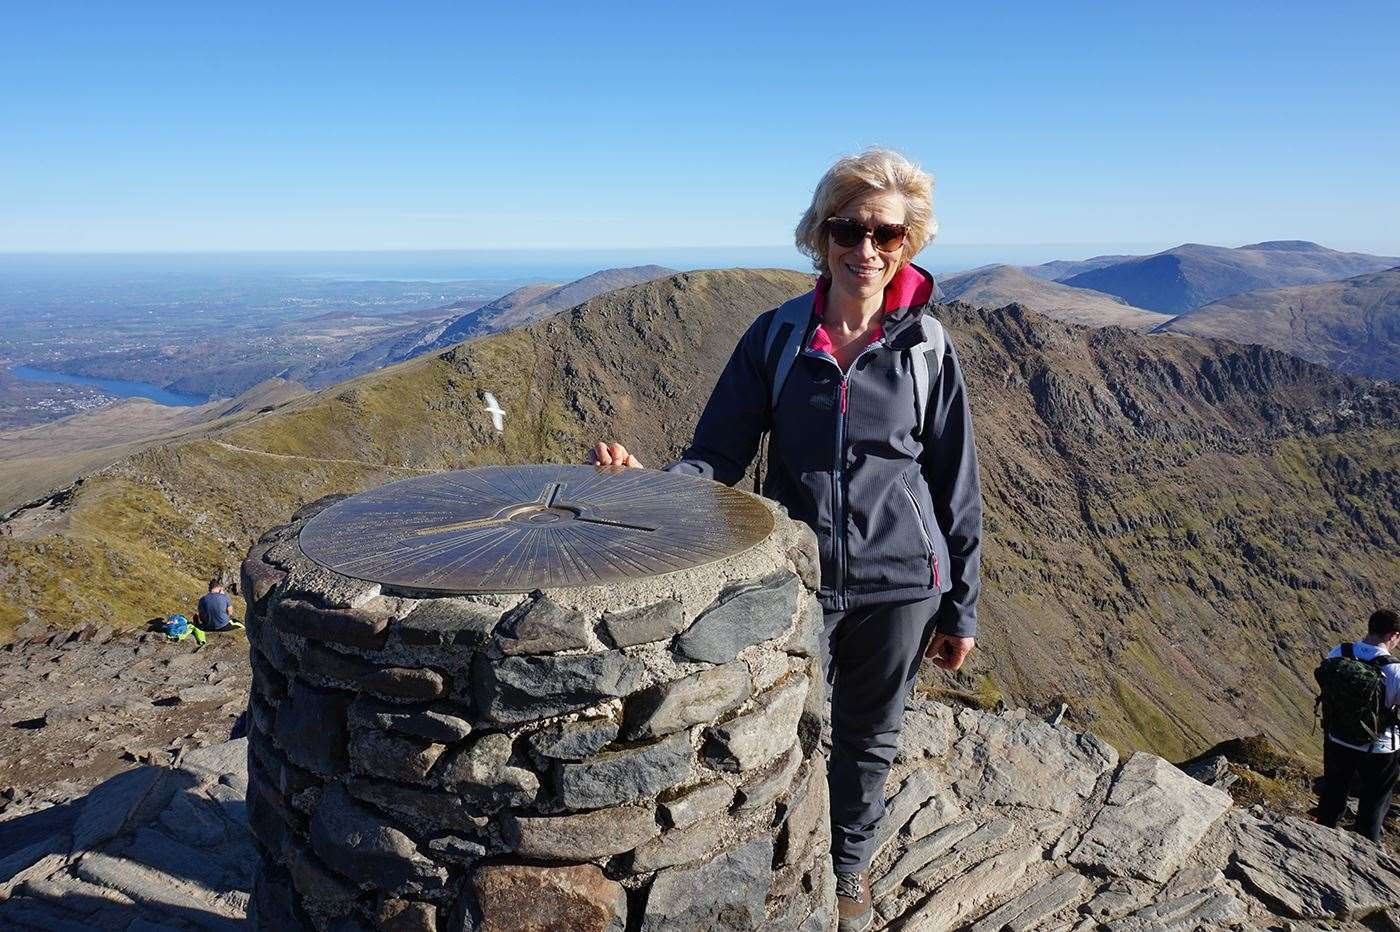 Melanie Butcher climbed to the top of Mount Snowdon